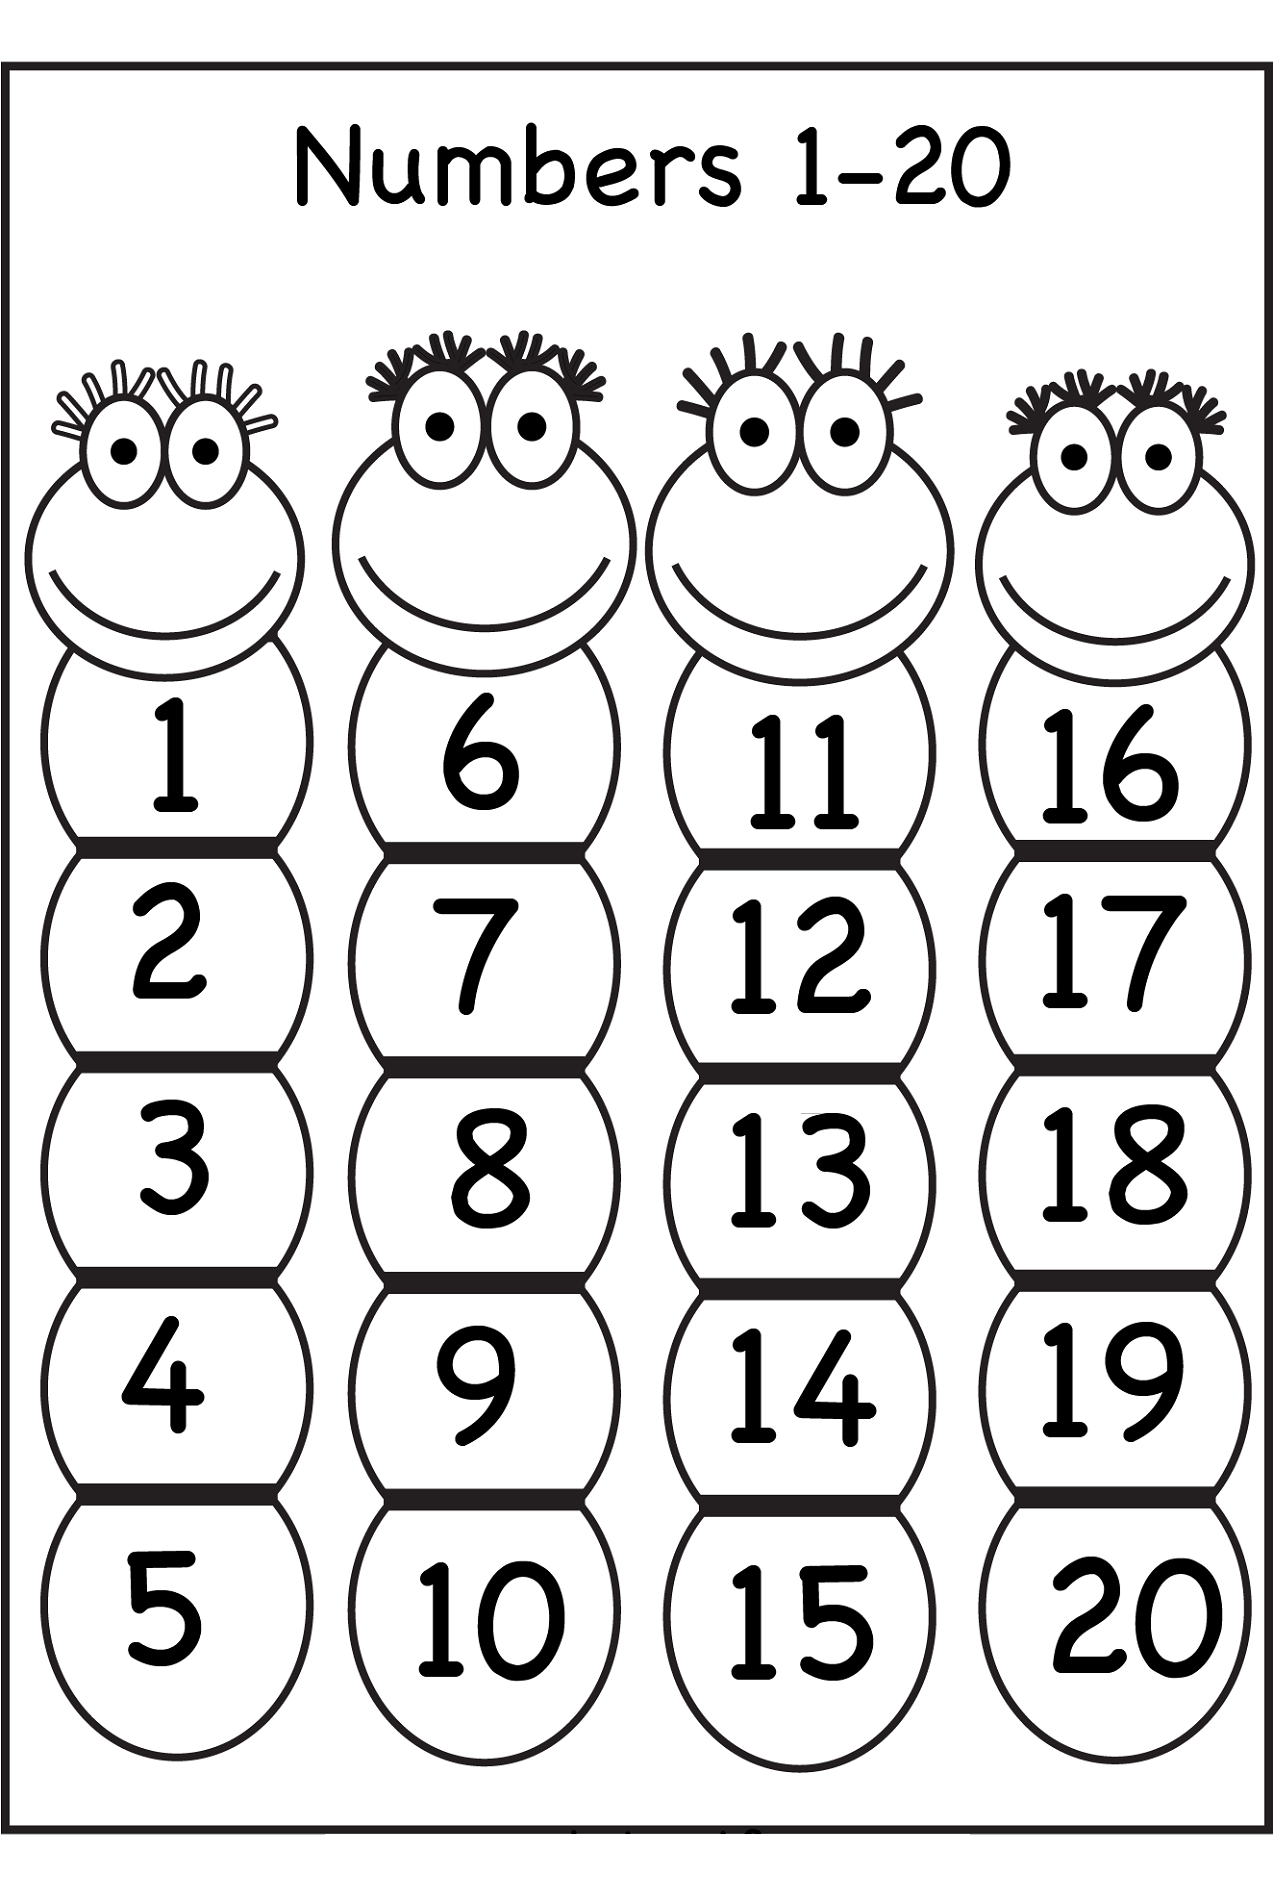 free-fun-missing-number-worksheets-tulamama-trace-number-1-20-worksheets-activity-shelter